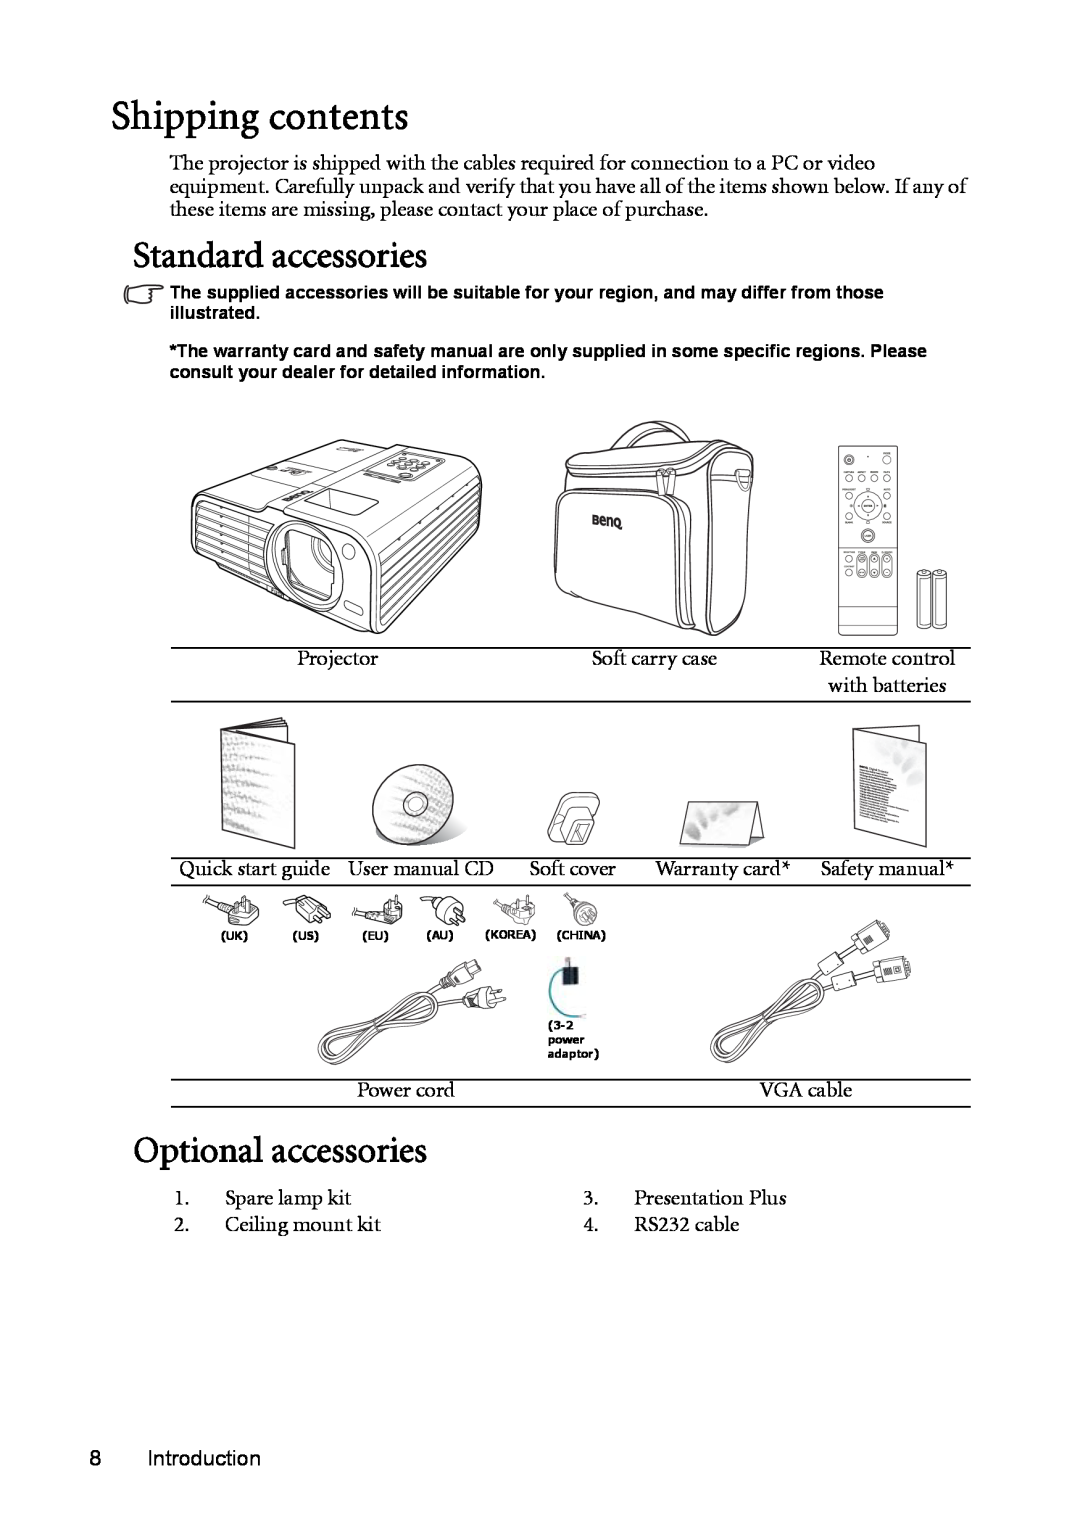 BenQ MP723 user manual Shipping contents, Standard accessories, Optional accessories 